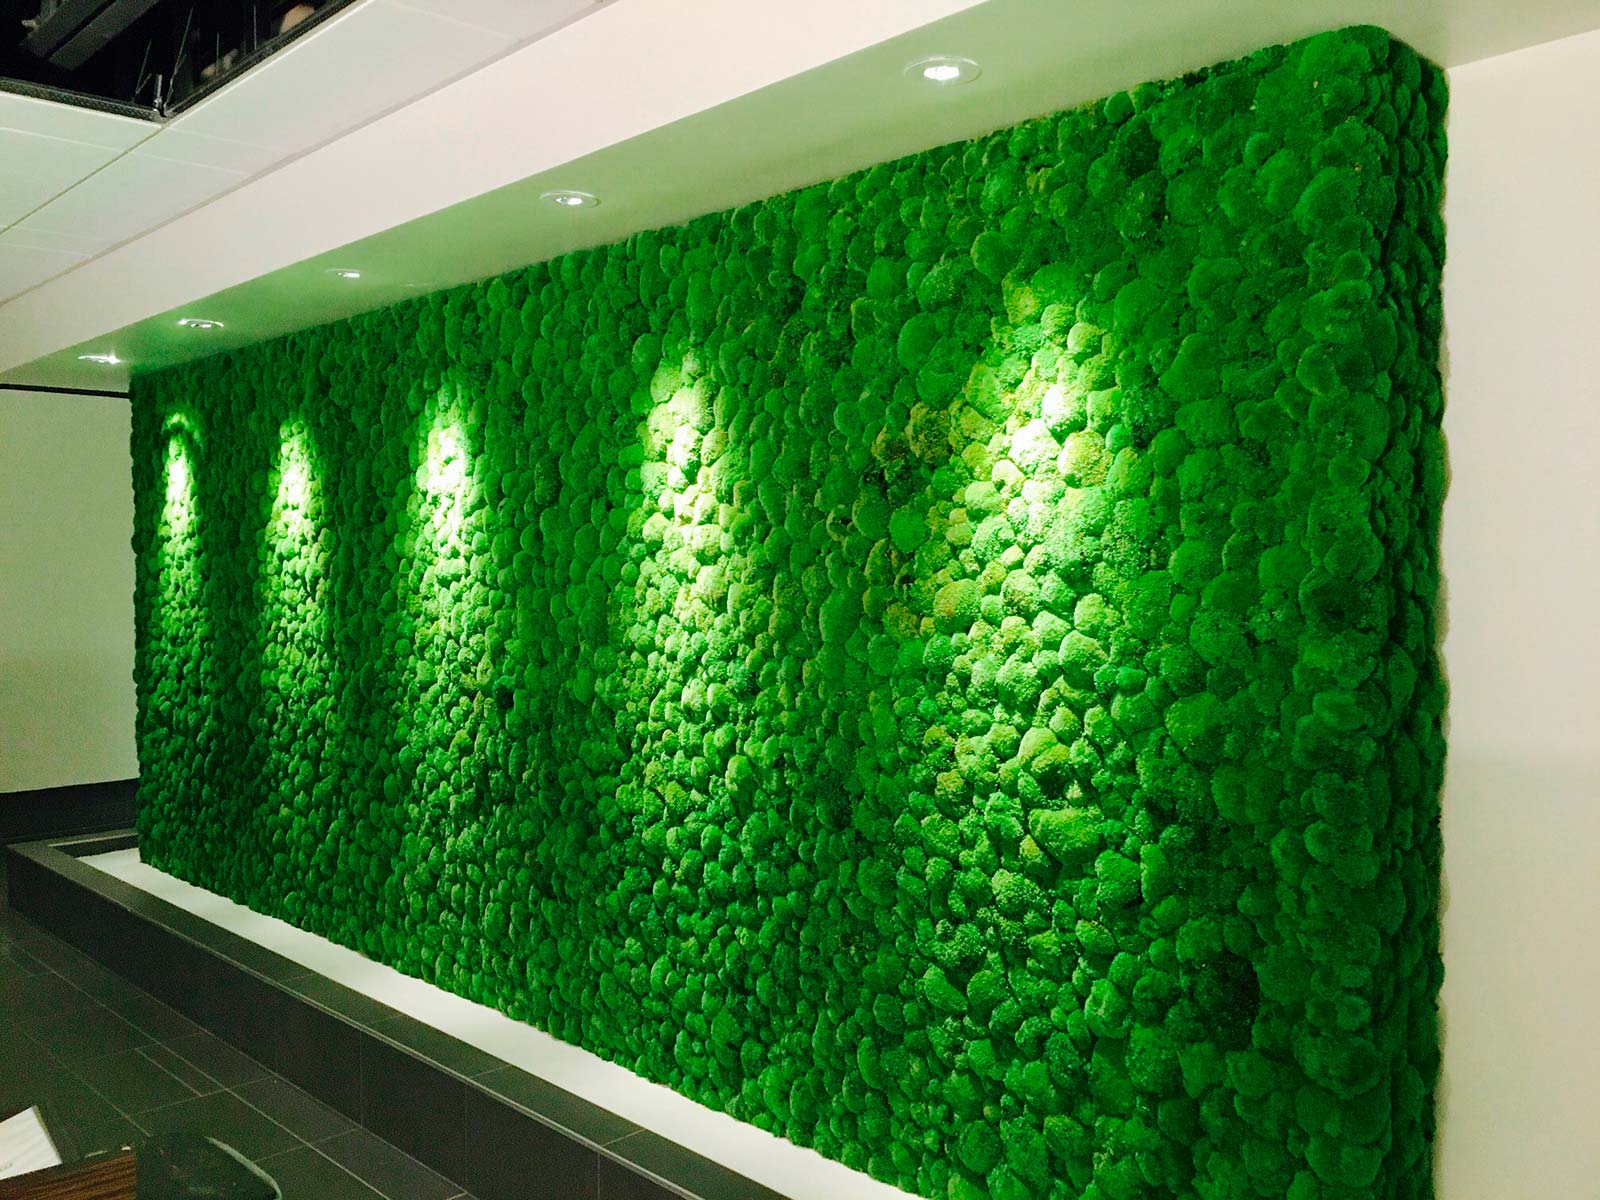 100% Natural Plants Installed In Vertical Gardens on Ceilings & Walls